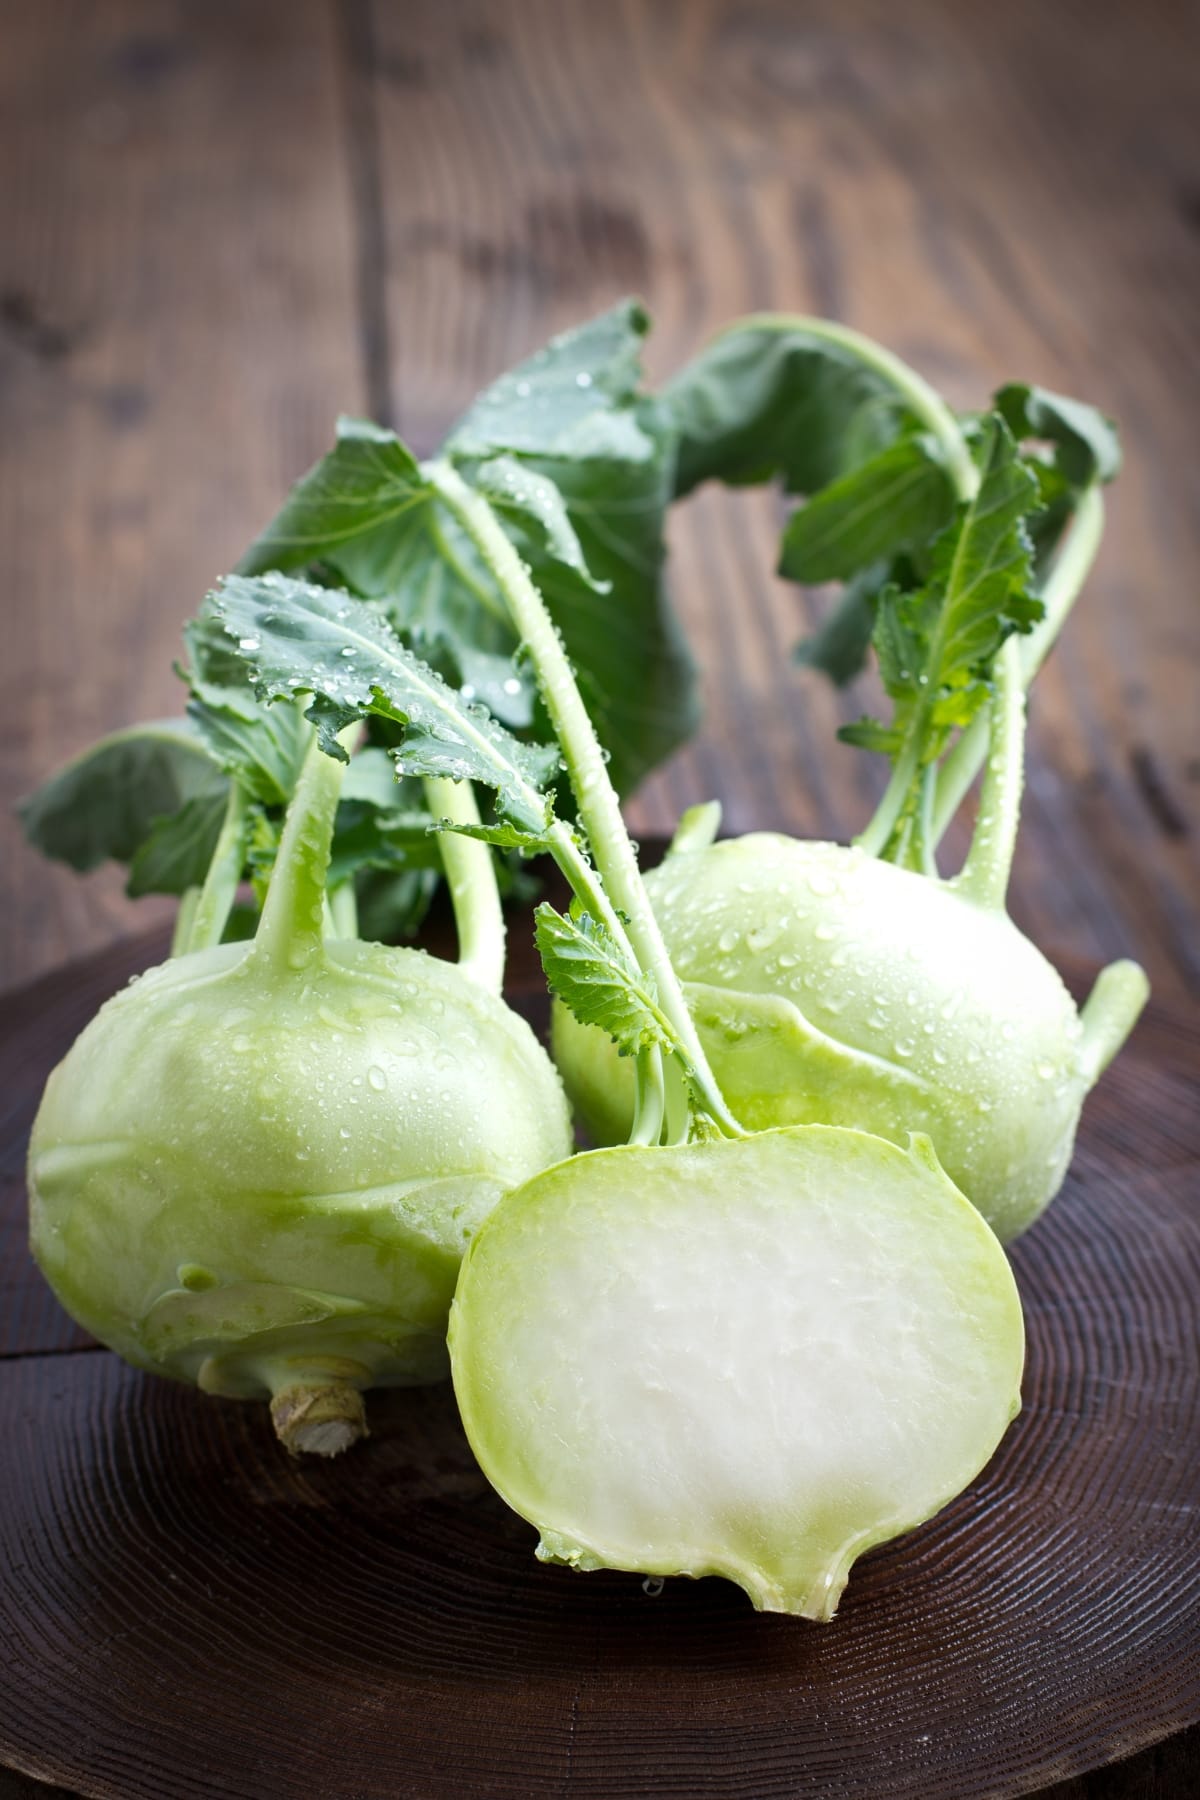 What Is Kohlrabi? (All You Need to Know) featuring Two Whole and One Sliced Dewy Fresh Kohlrabi on a Wooden Table